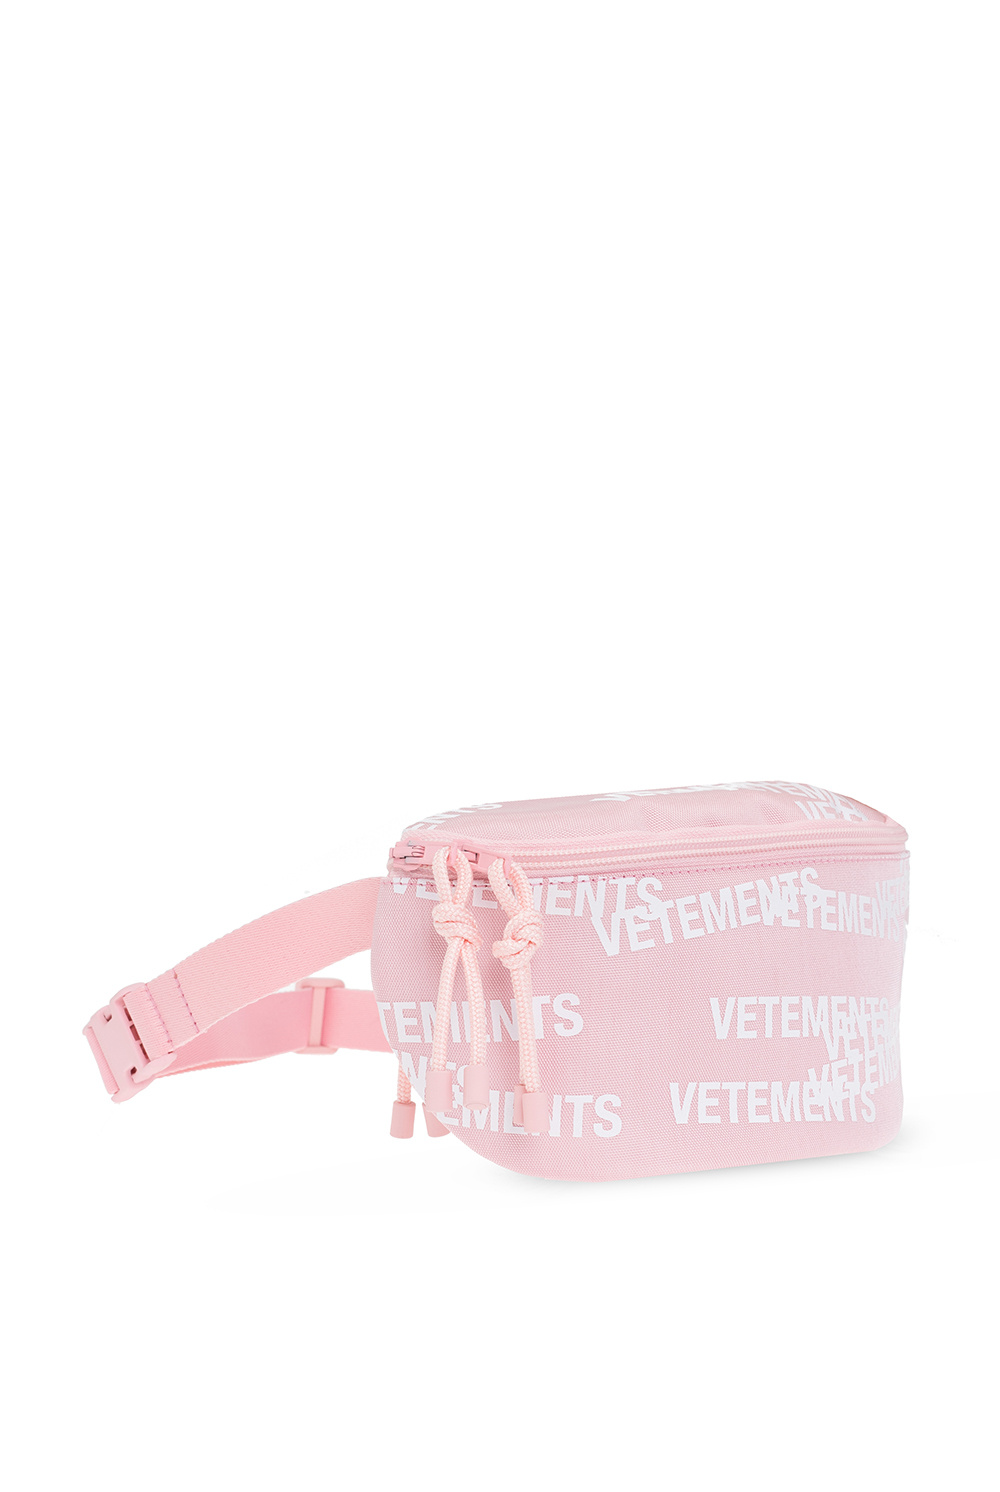 VETEMENTS Cosmetic Oval Bag